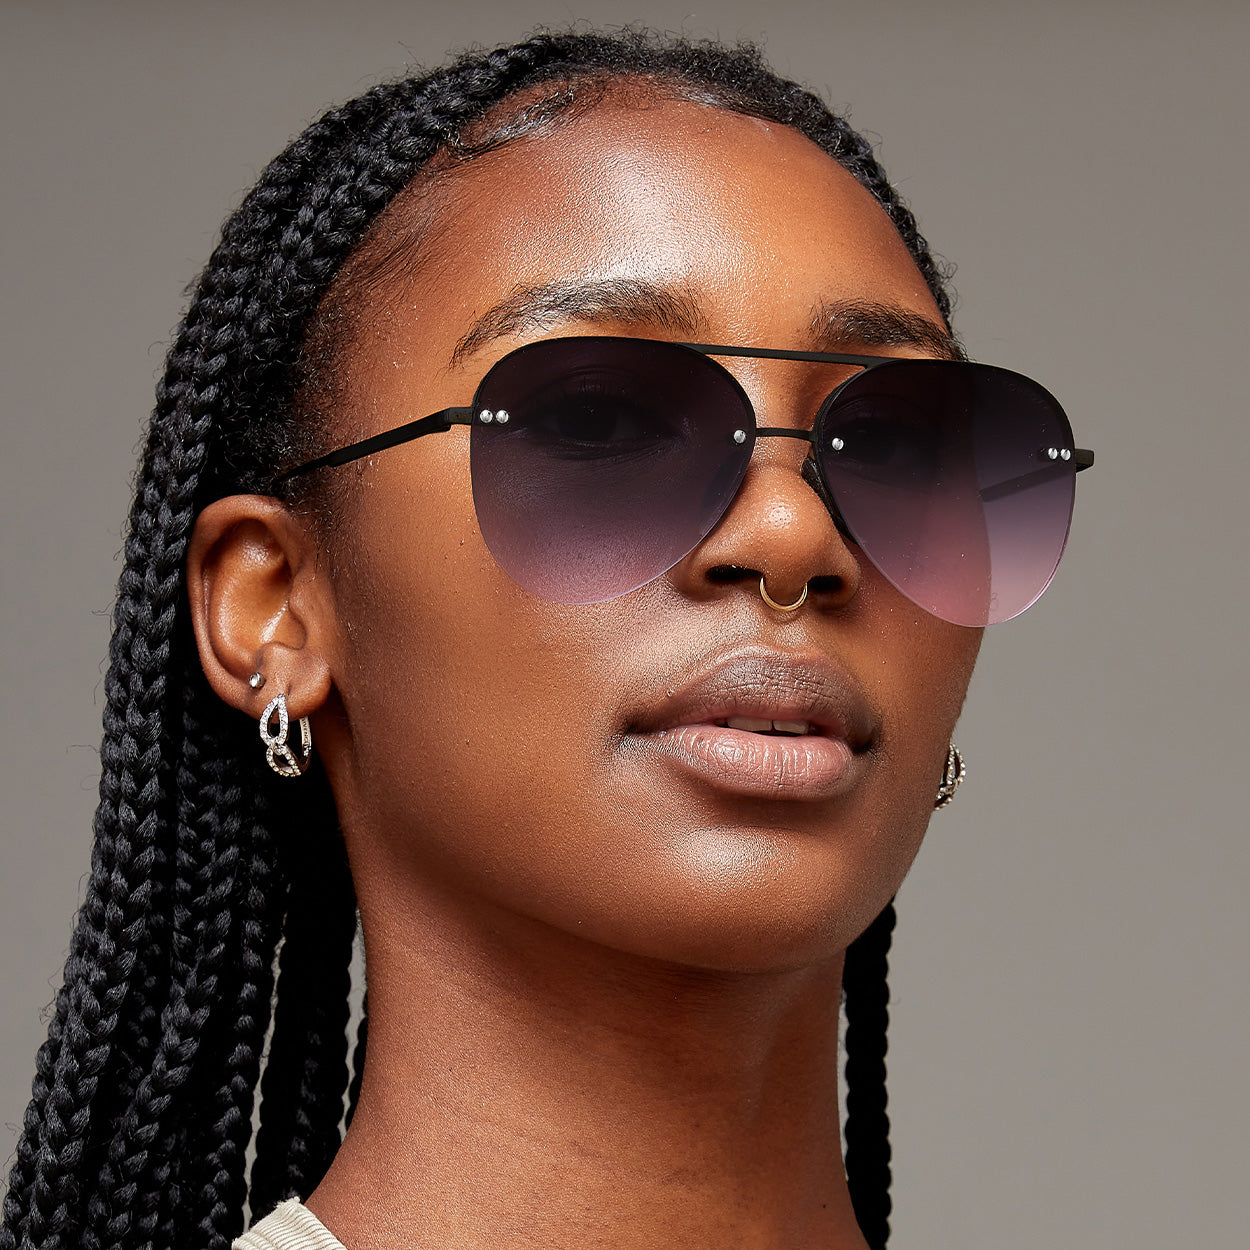 Model of color wearing classic aviators with no nosepad and faded purple pink lenses with metal detailing